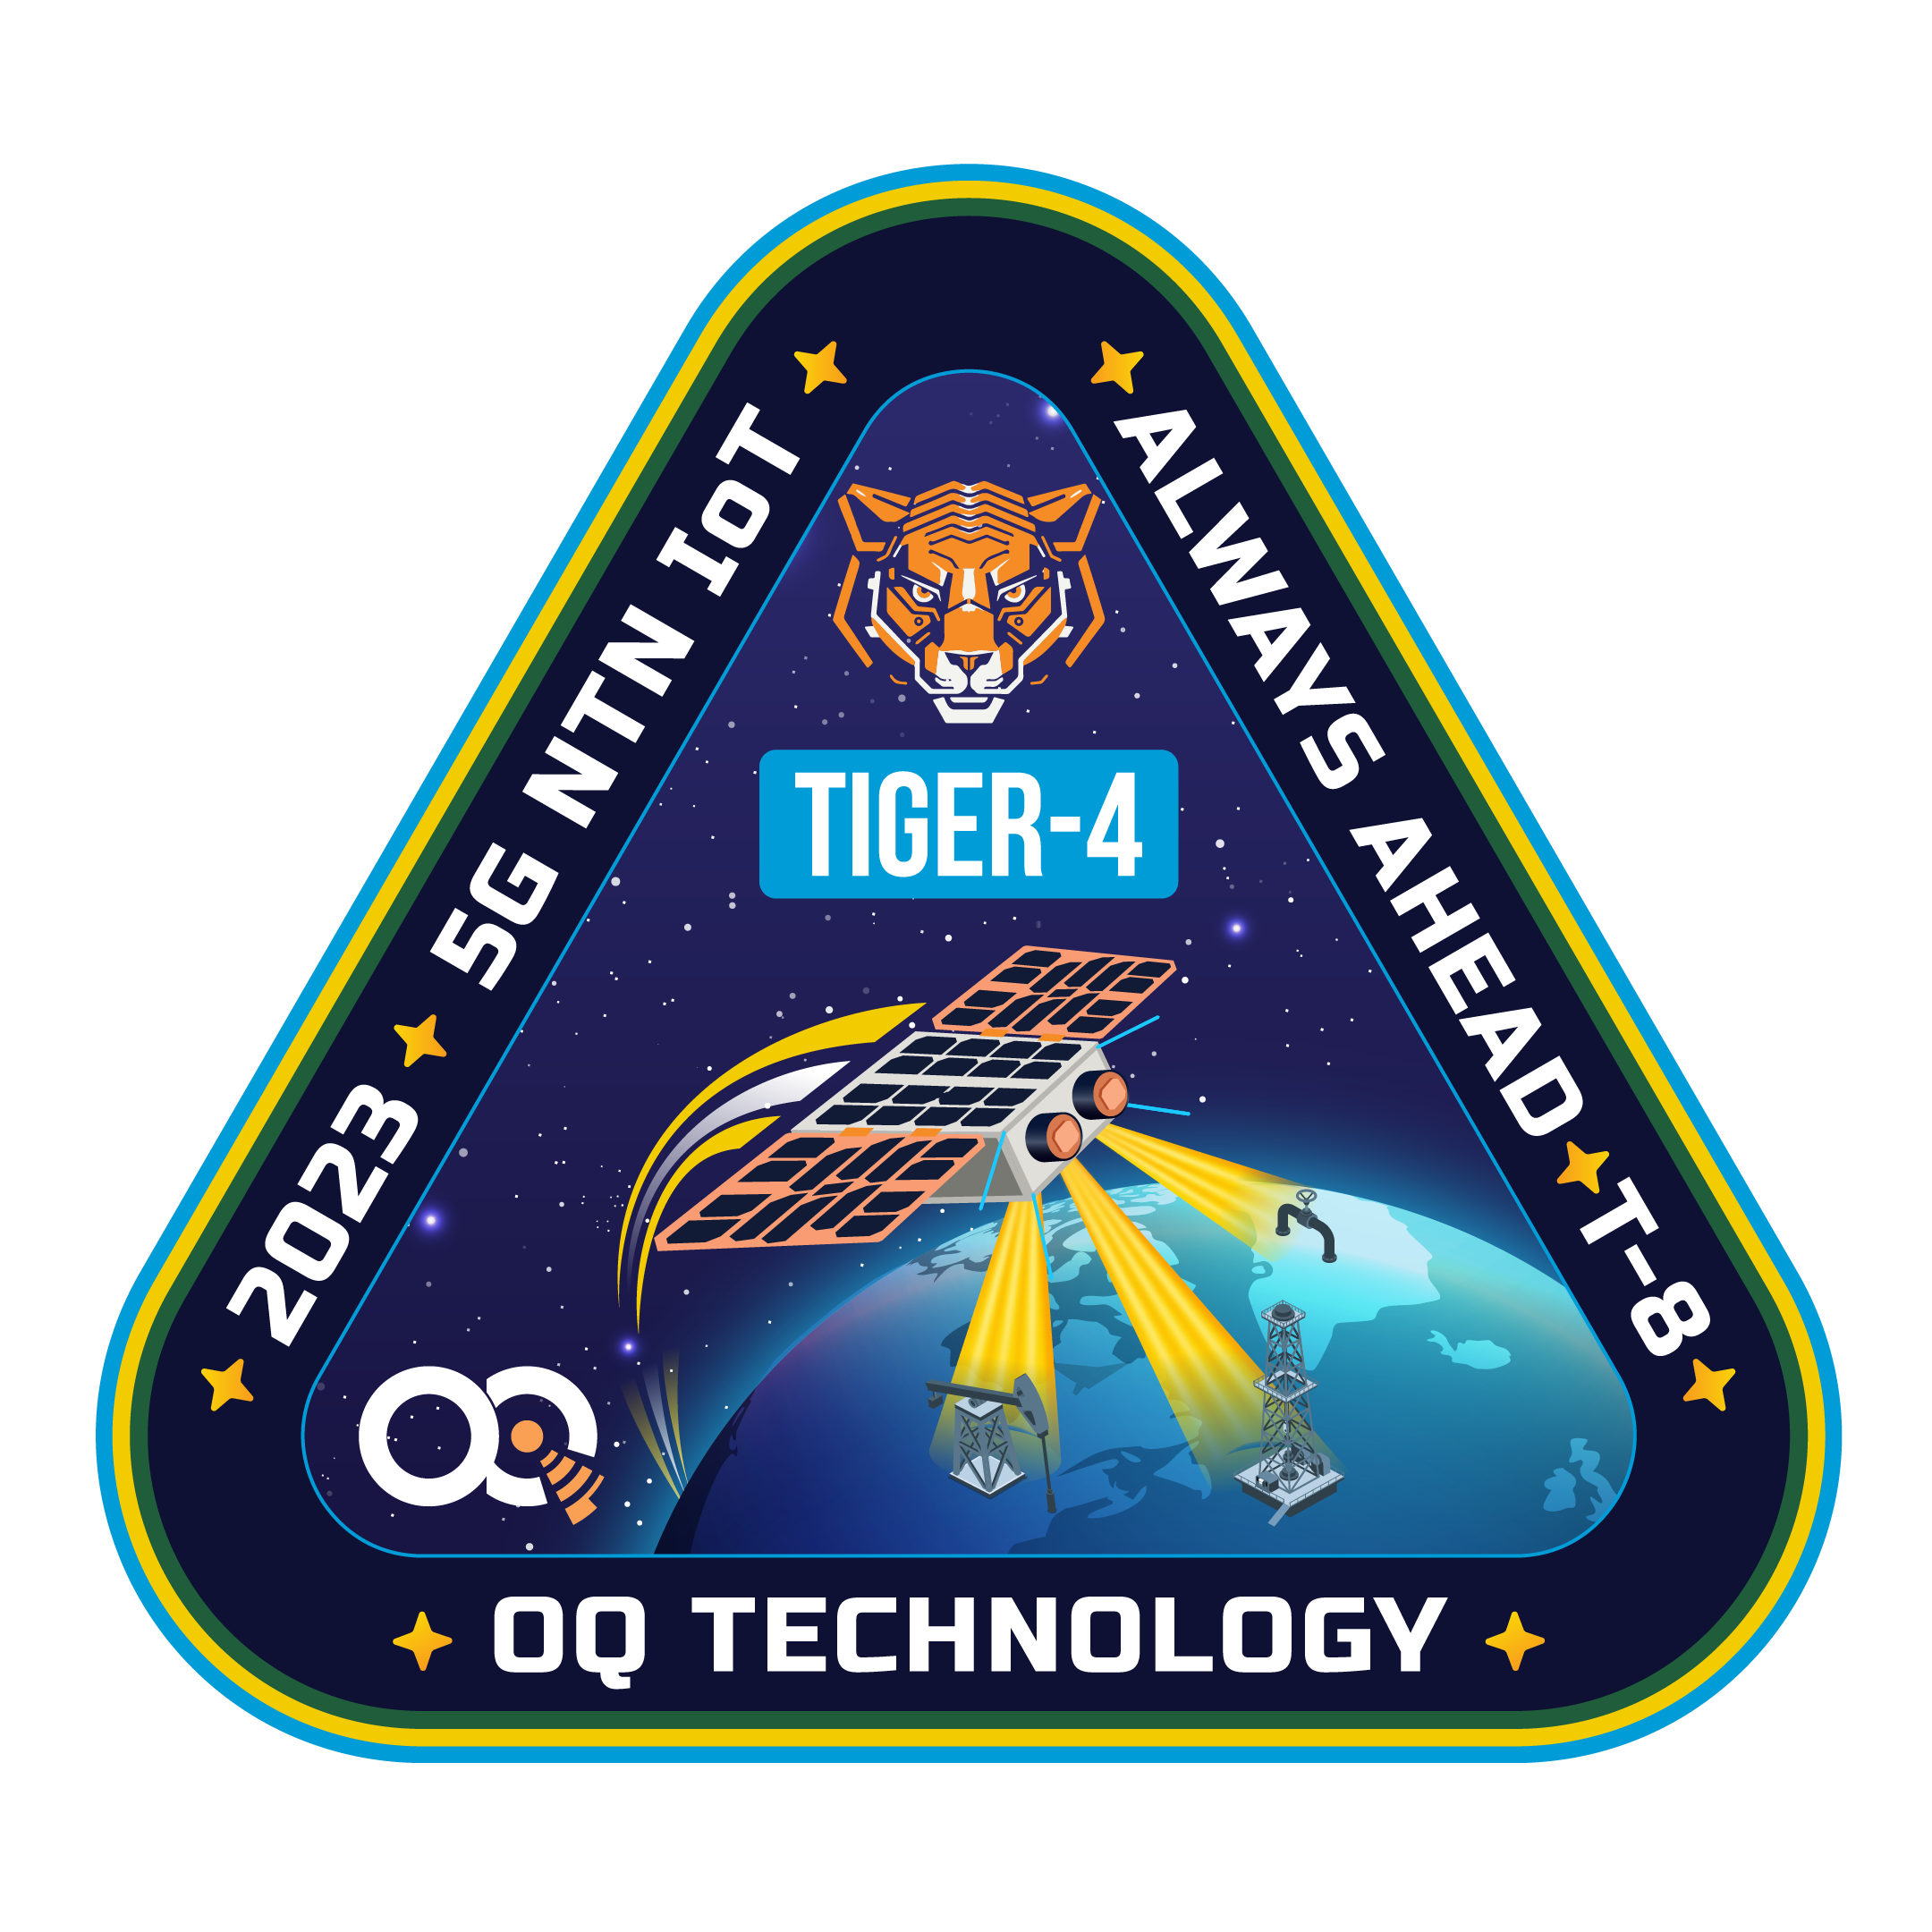 Tiger-4 Mission Patch